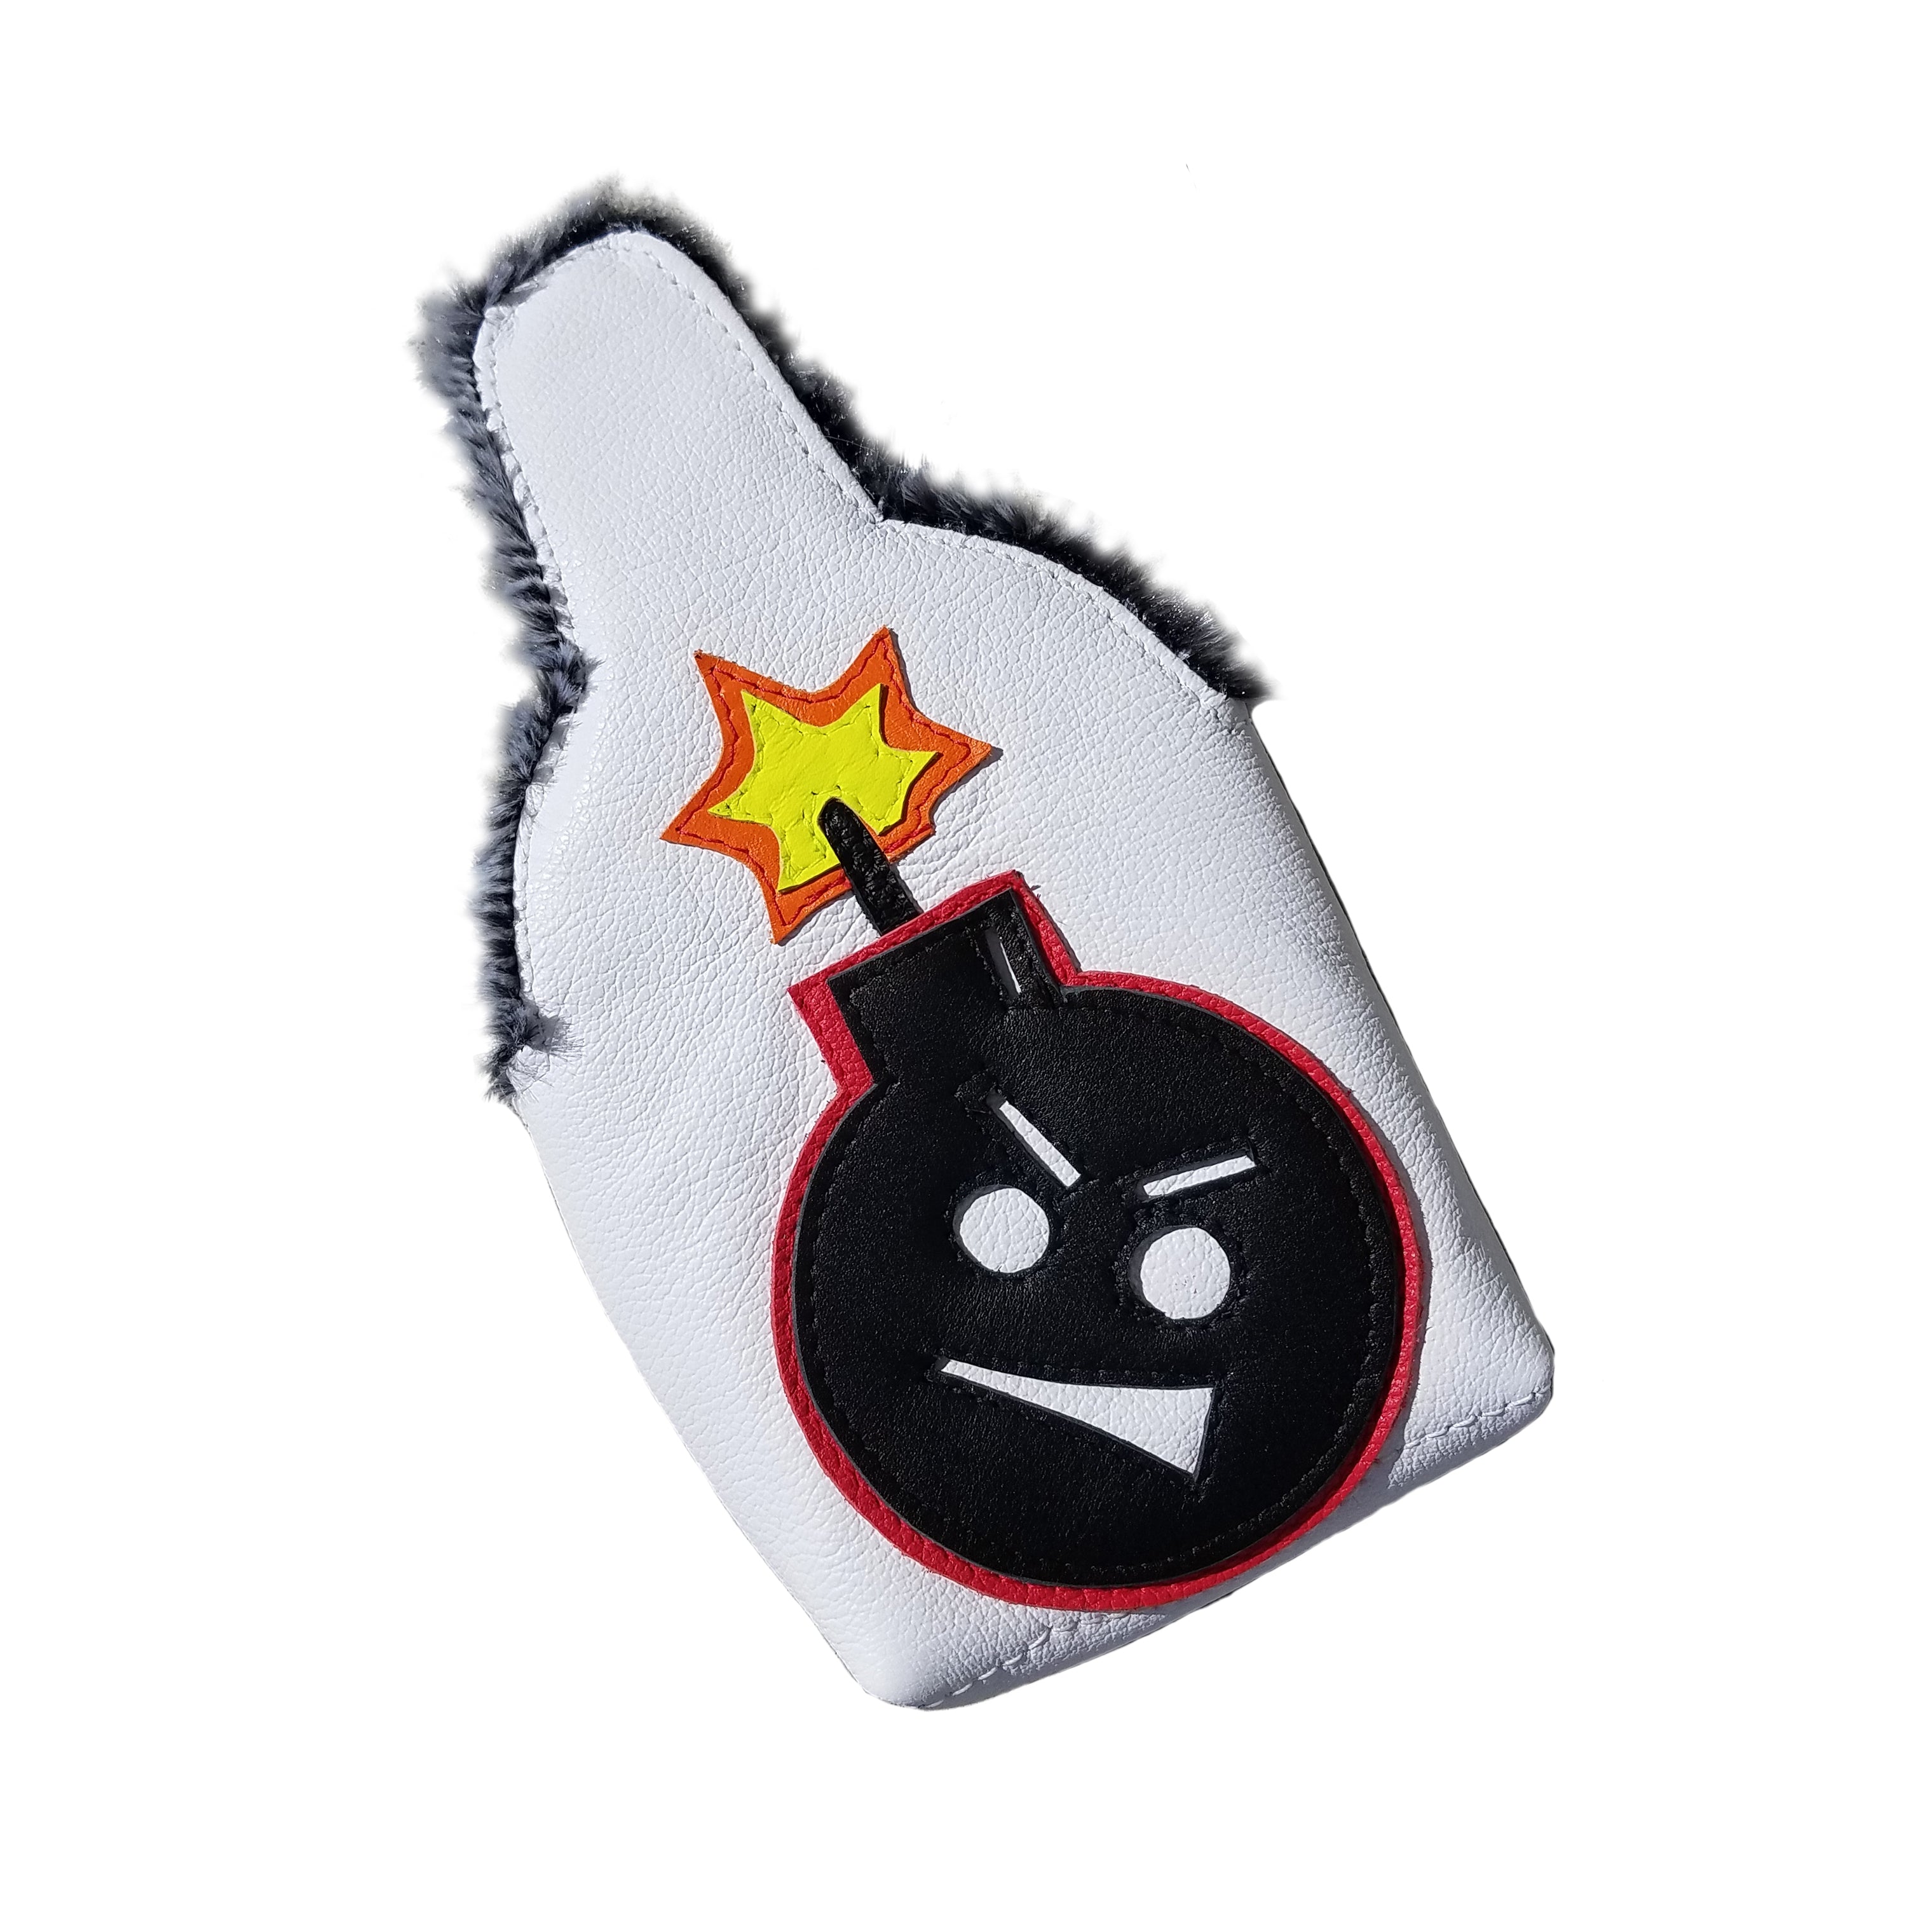 Tour Model/Itsy Bitsy Spider "Angry Bomb" Putter Cover - Robert Mark Golf